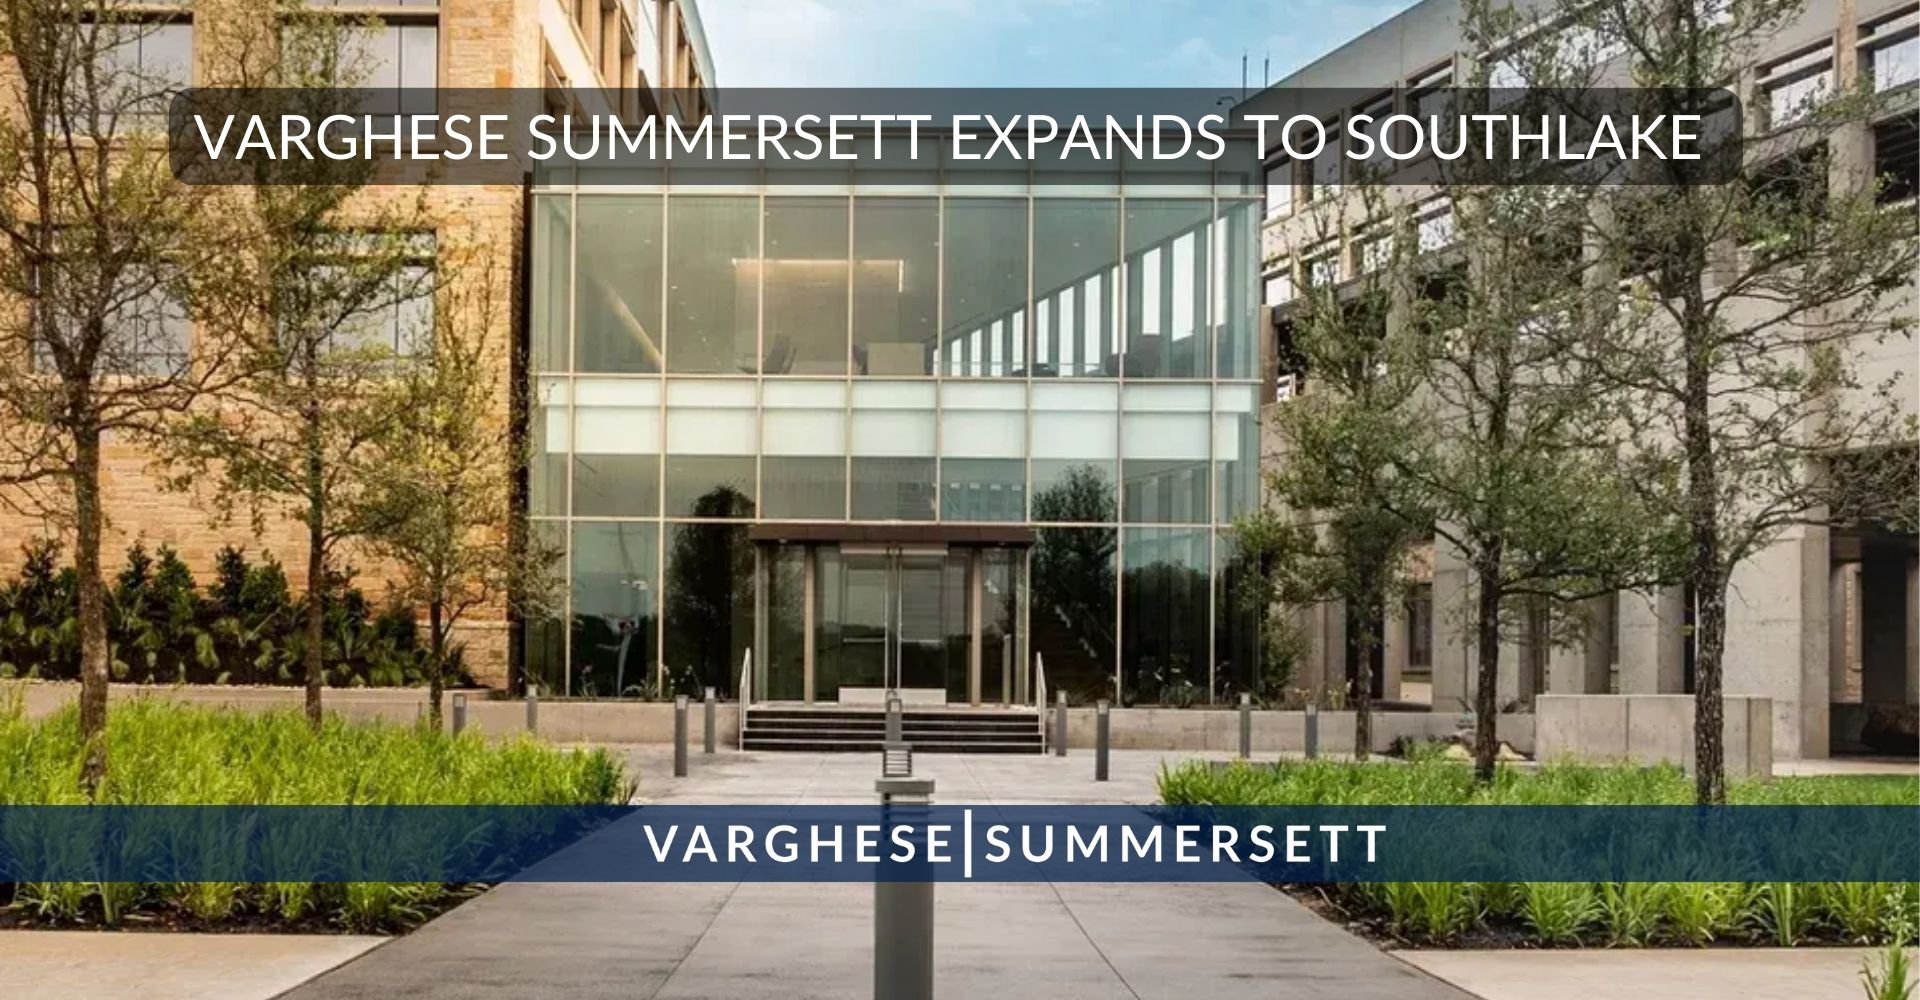 Varghese Summersett Expands to Southlake